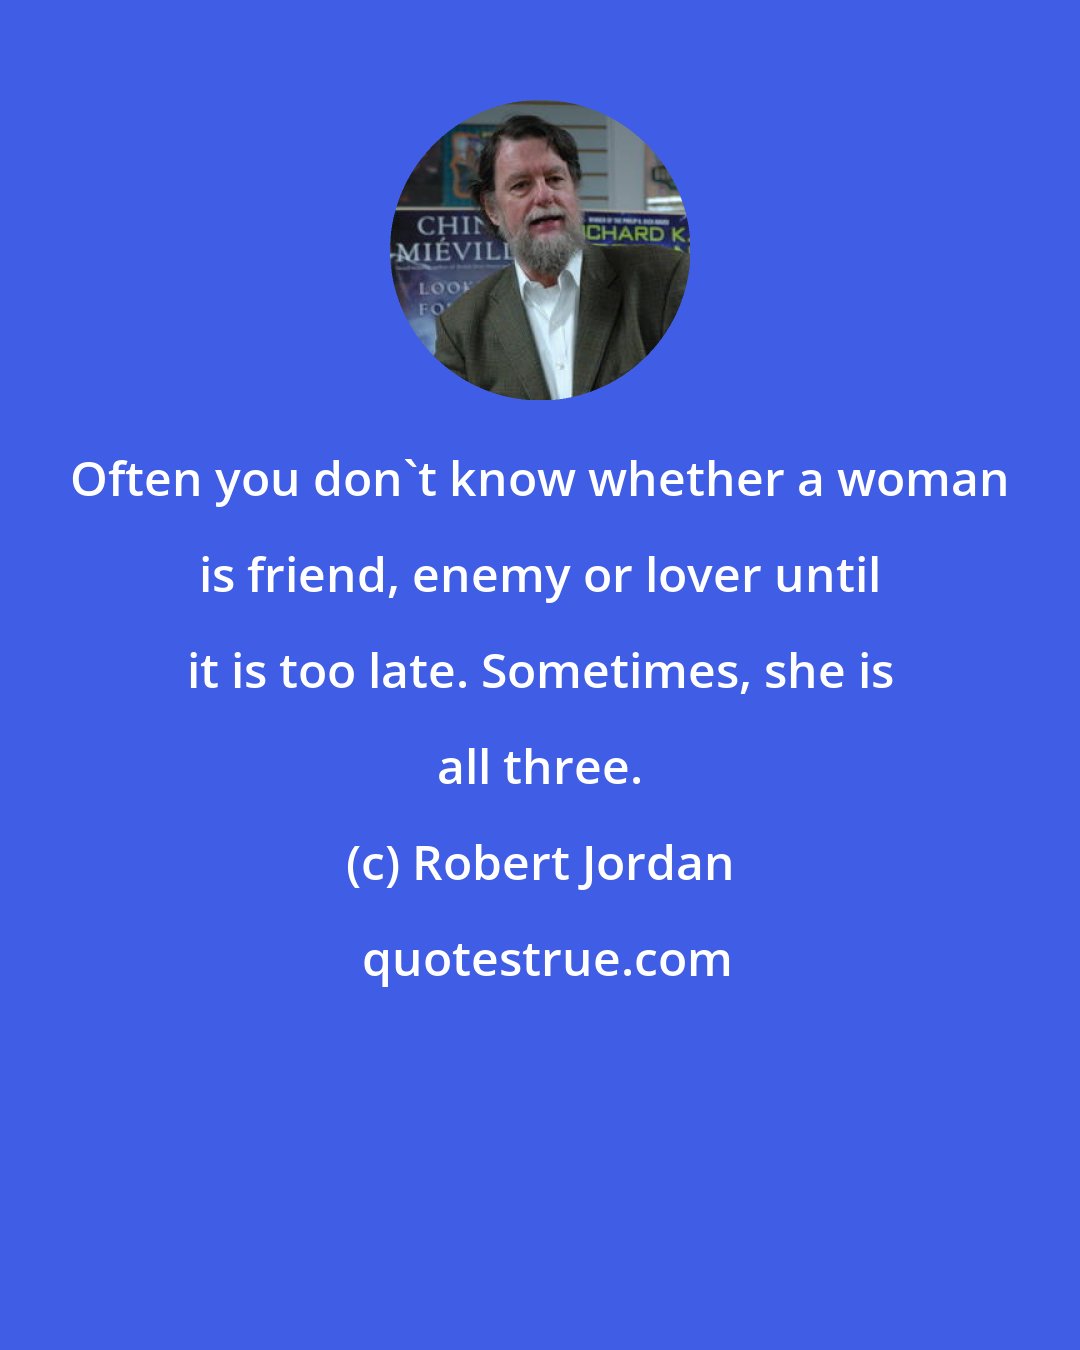 Robert Jordan: Often you don't know whether a woman is friend, enemy or lover until it is too late. Sometimes, she is all three.